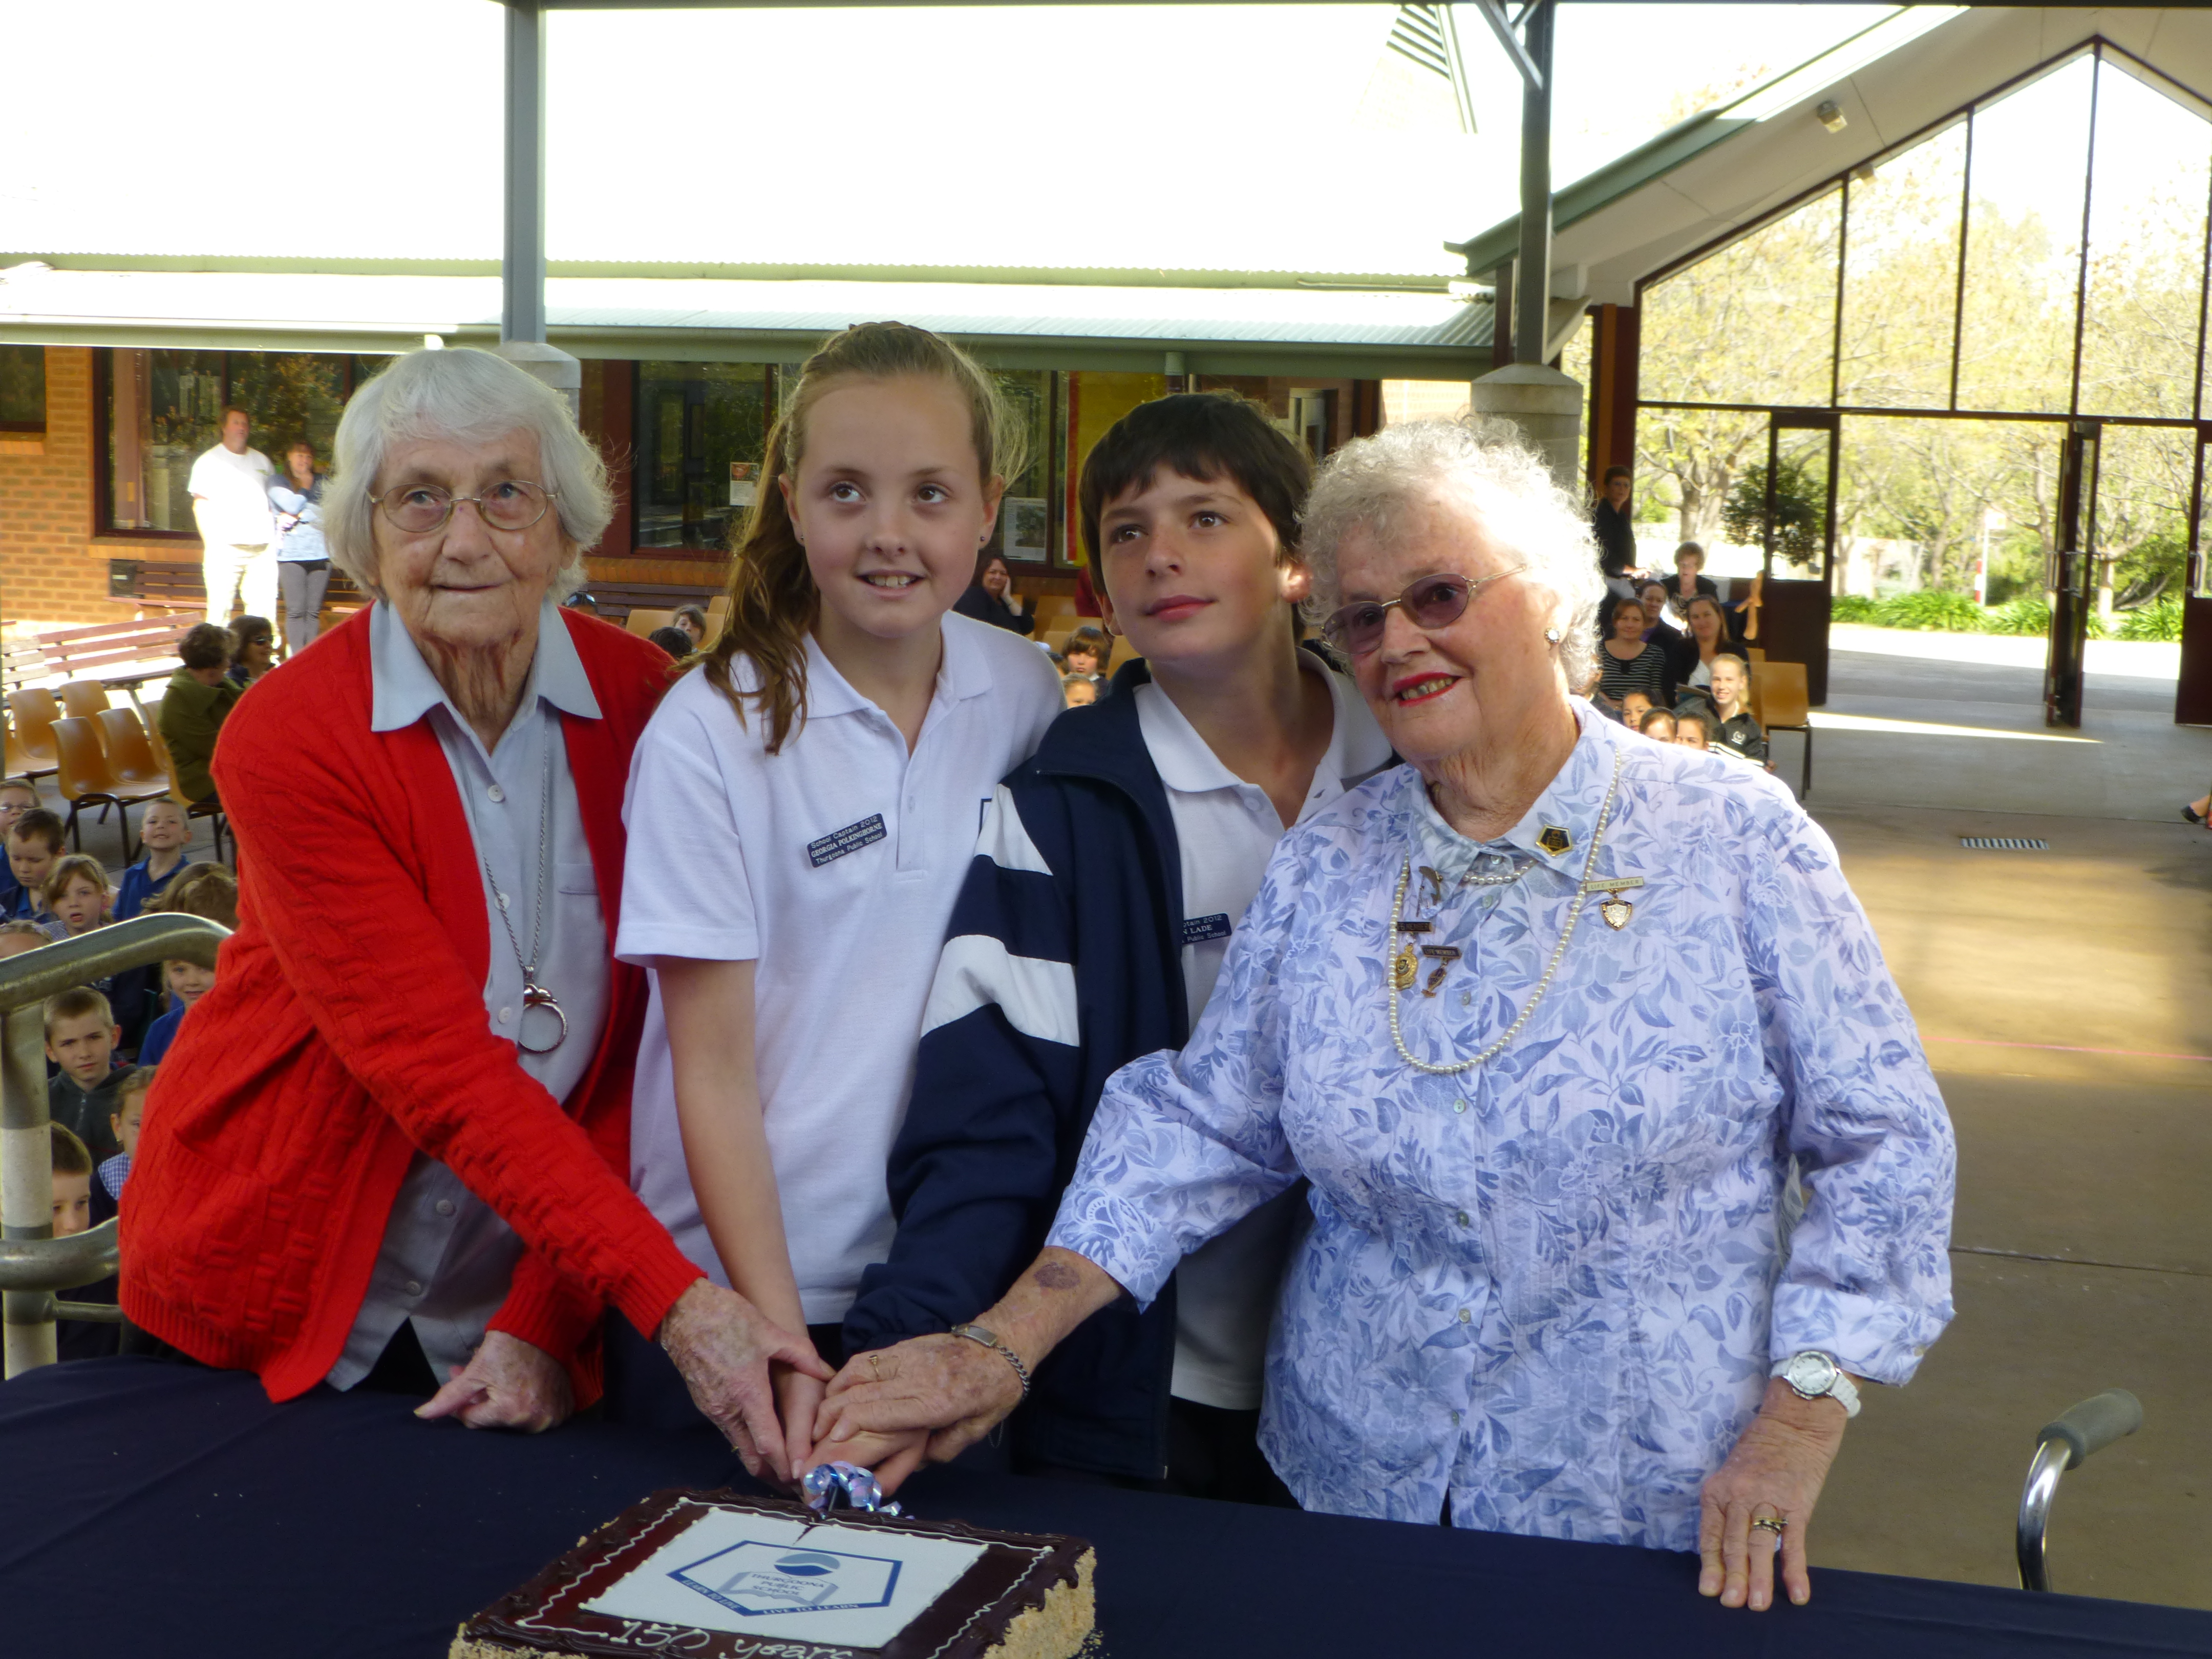 In 2012 Thurgoona Public School celebrated 150 years.  The school captains and some of the special guests cut  the 150 year cake.